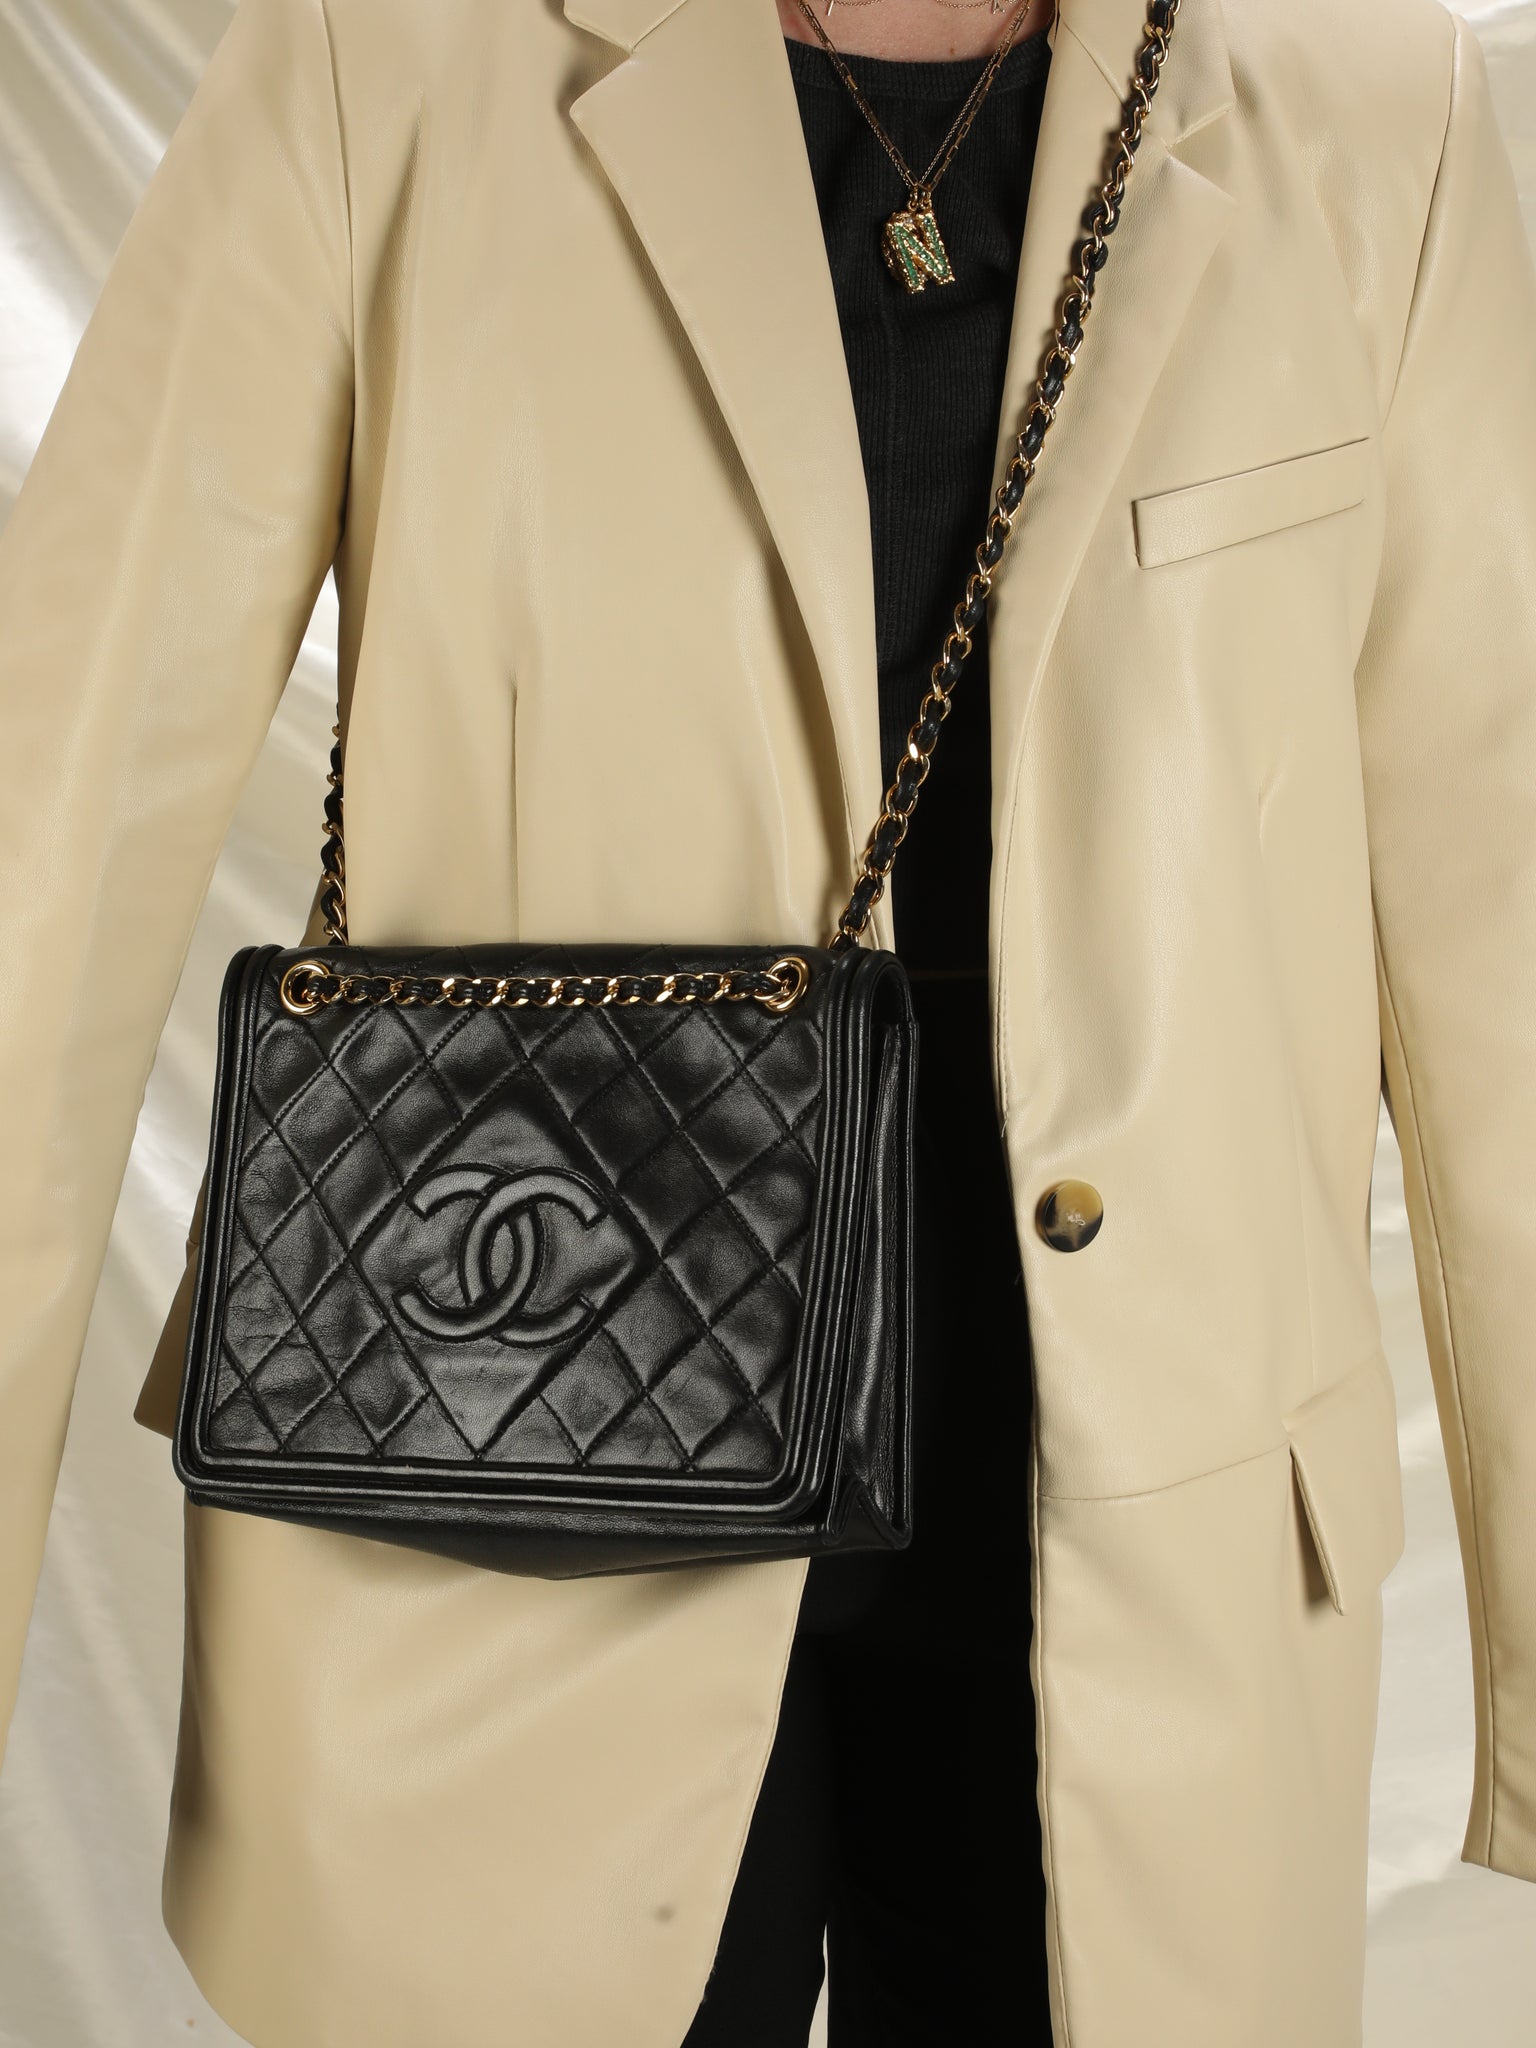 Chanel Timeless Quilted Flap Bag